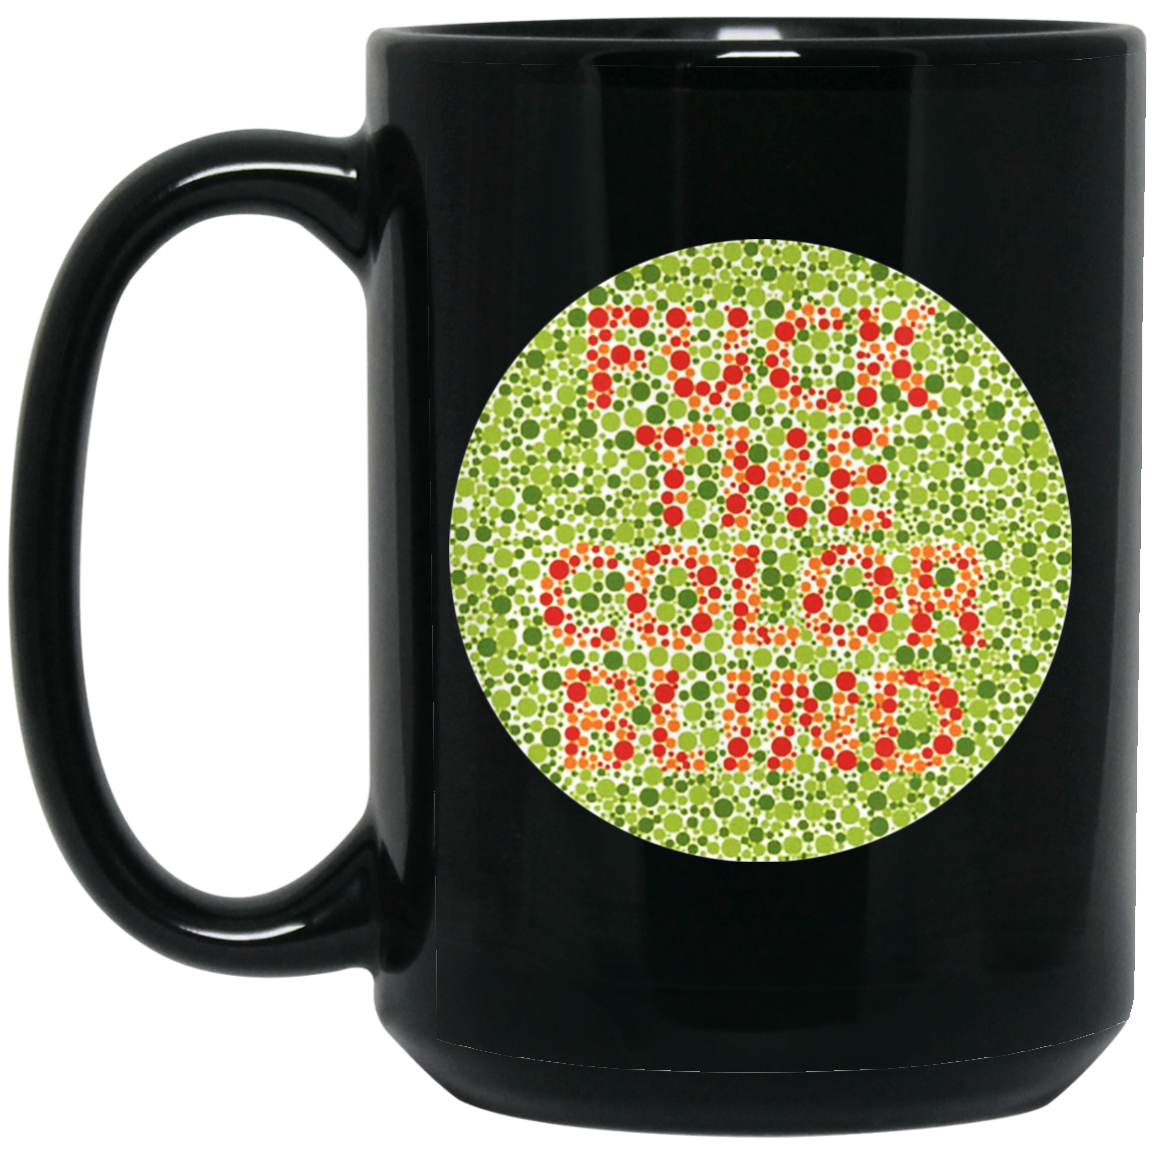 Fuck The Color Blind Mug 0sTees pic